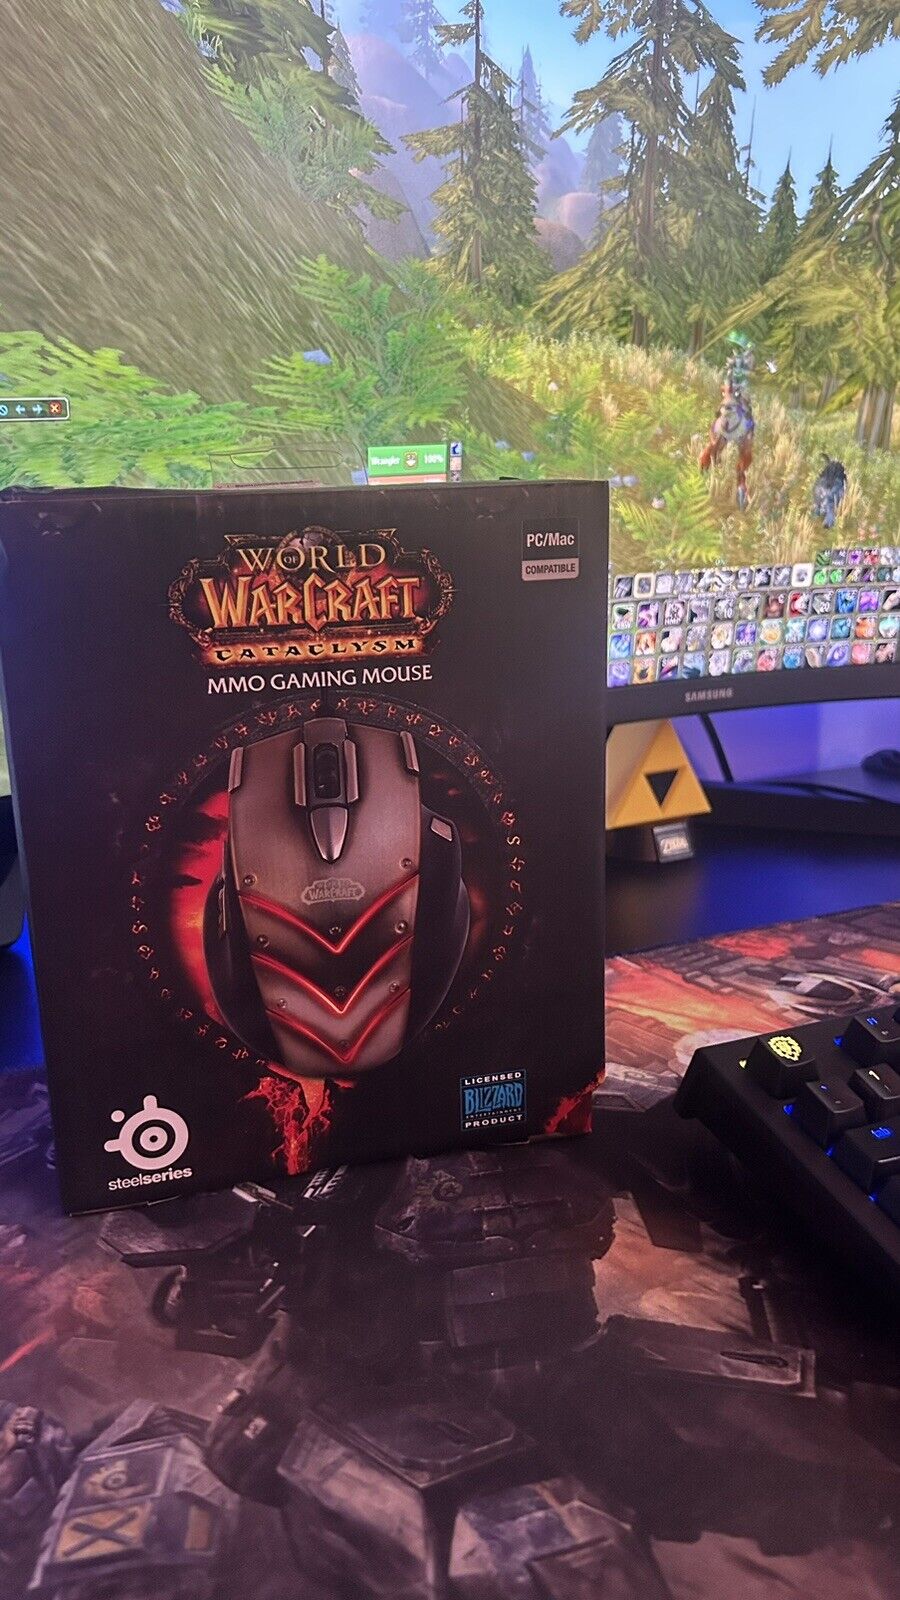 SteelSeries World of Warcraft Cataclysm MMO Gaming Mouse *New/Unused*